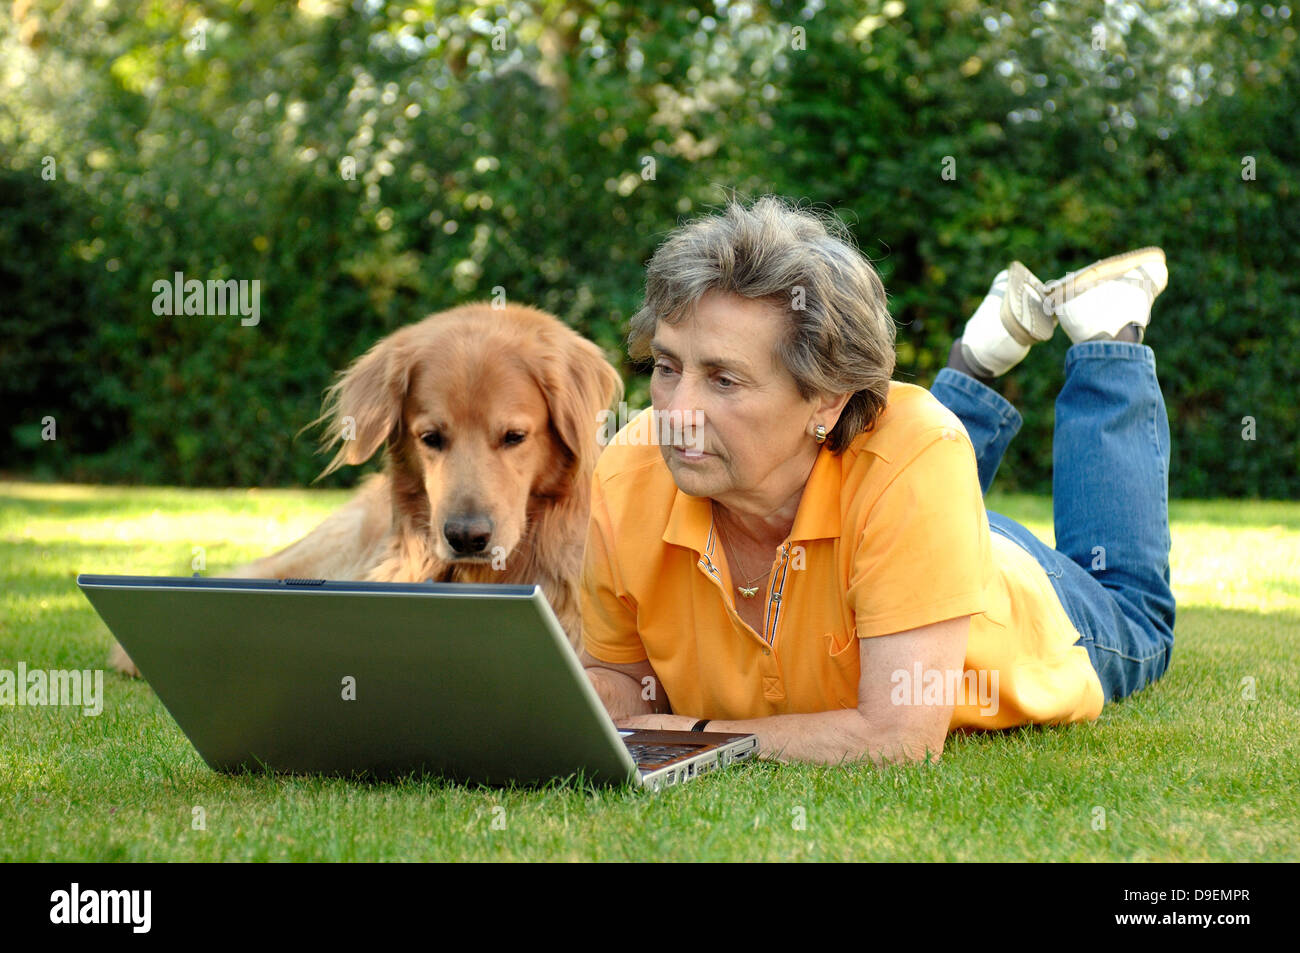 Senior on meadow recumbent, in the laptop laboringly. On her side a recumbent dog (Model release) Stock Photo